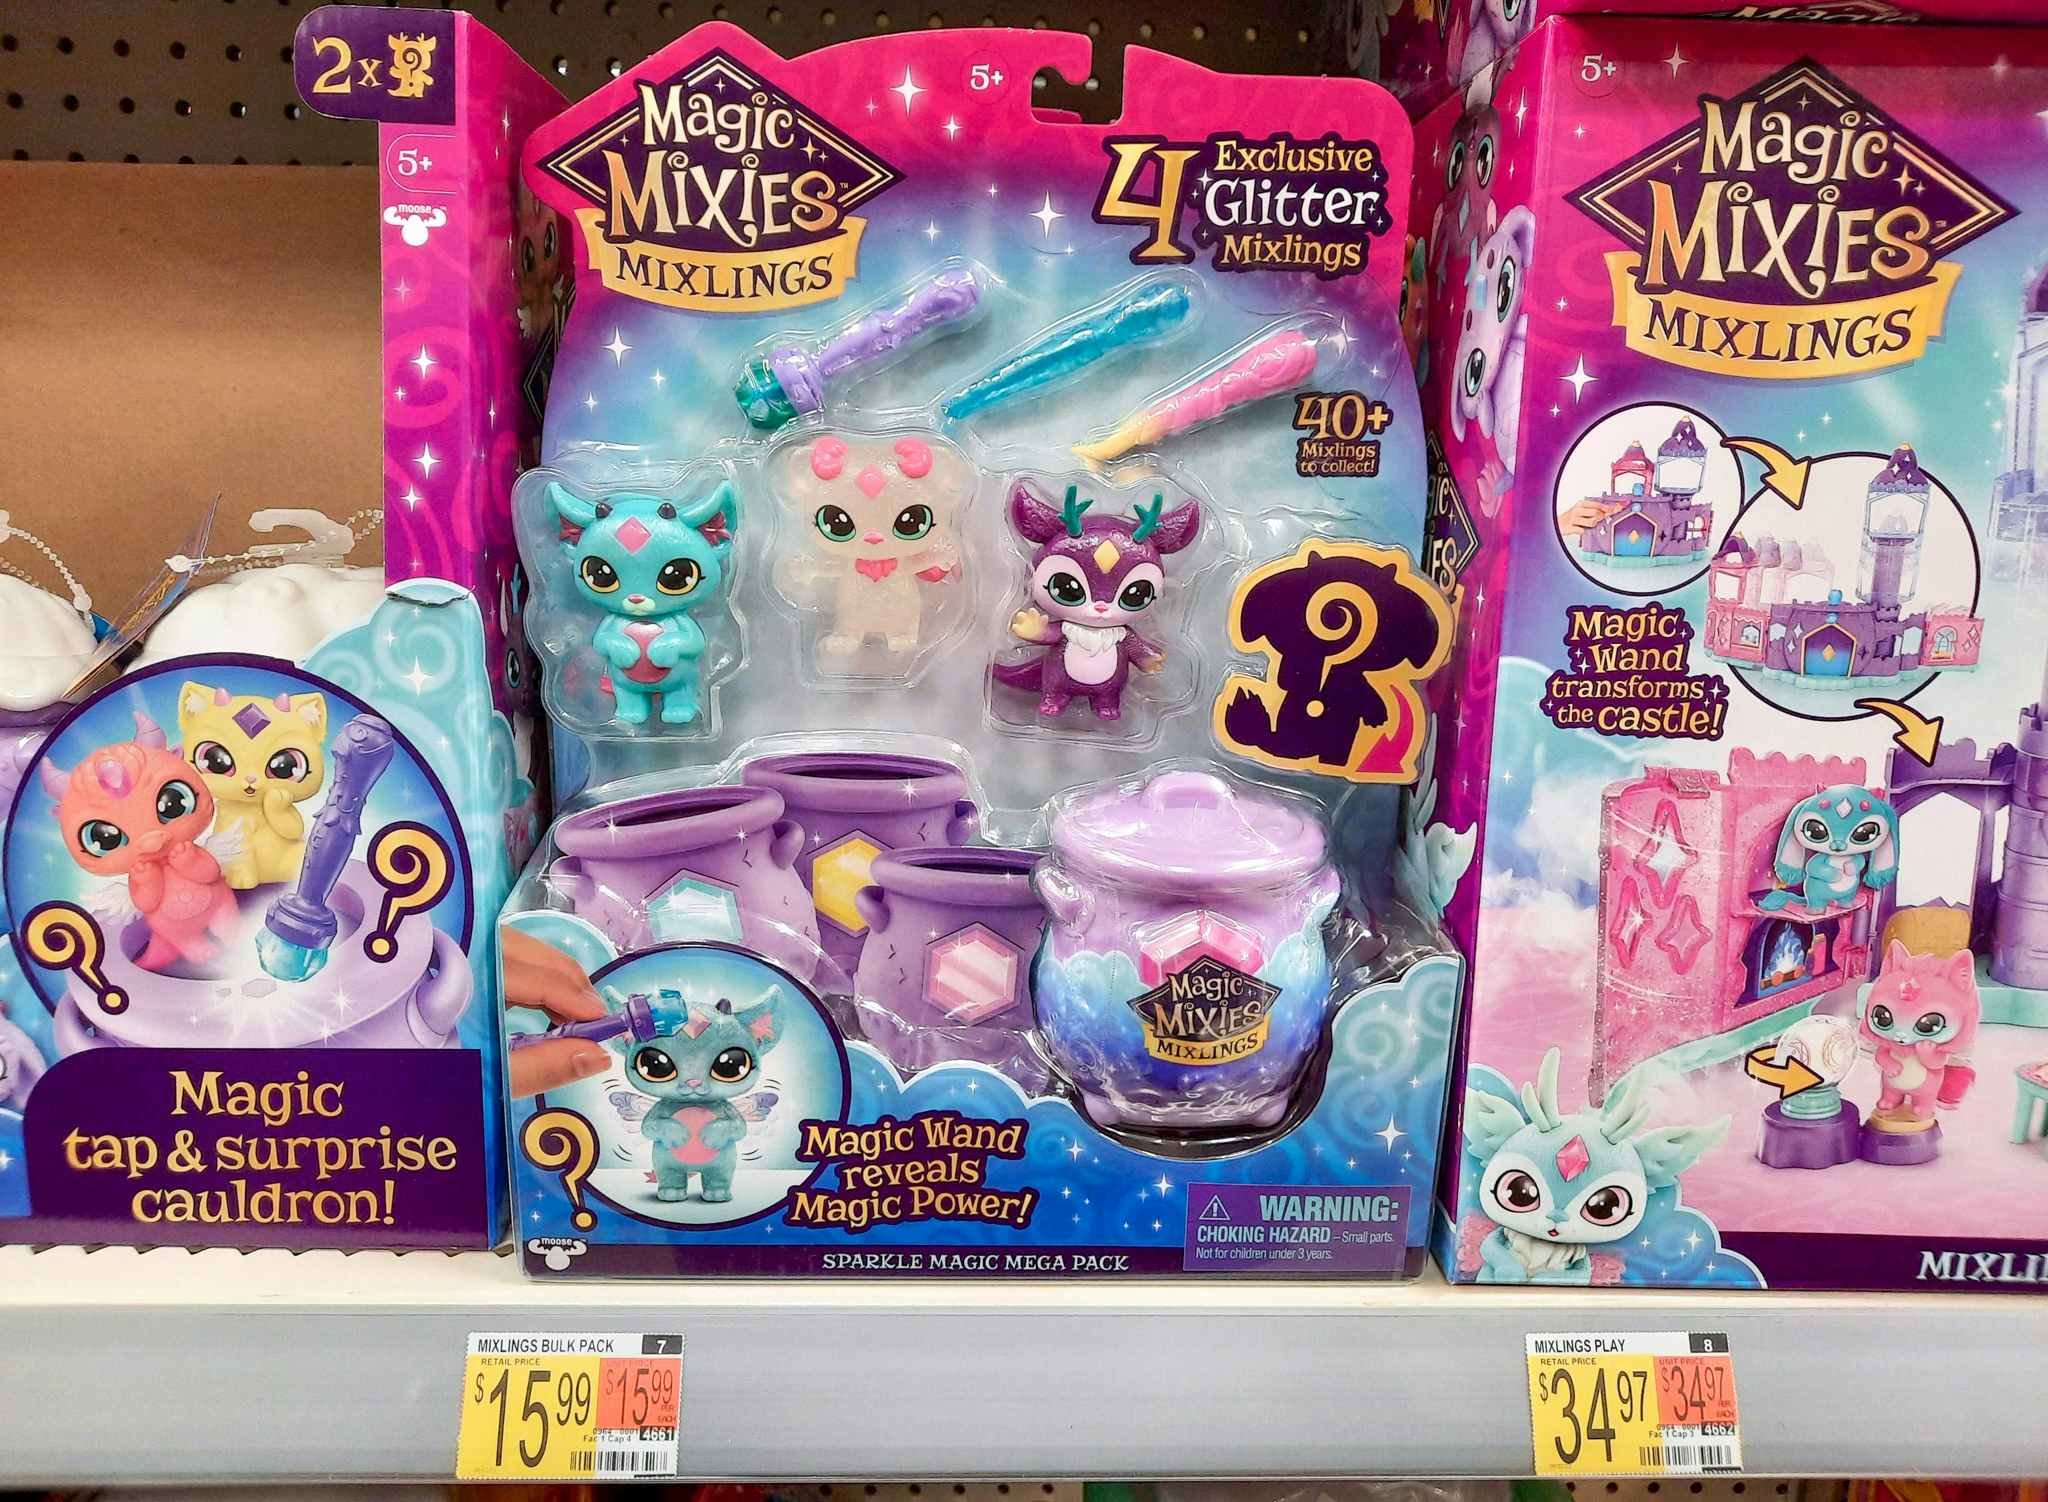 Magic Mixies Mixlings Sparkle Magic Meda Four Pack toy on shelf at Walmart. Price tag on shelf indicates that the price is $15.99.